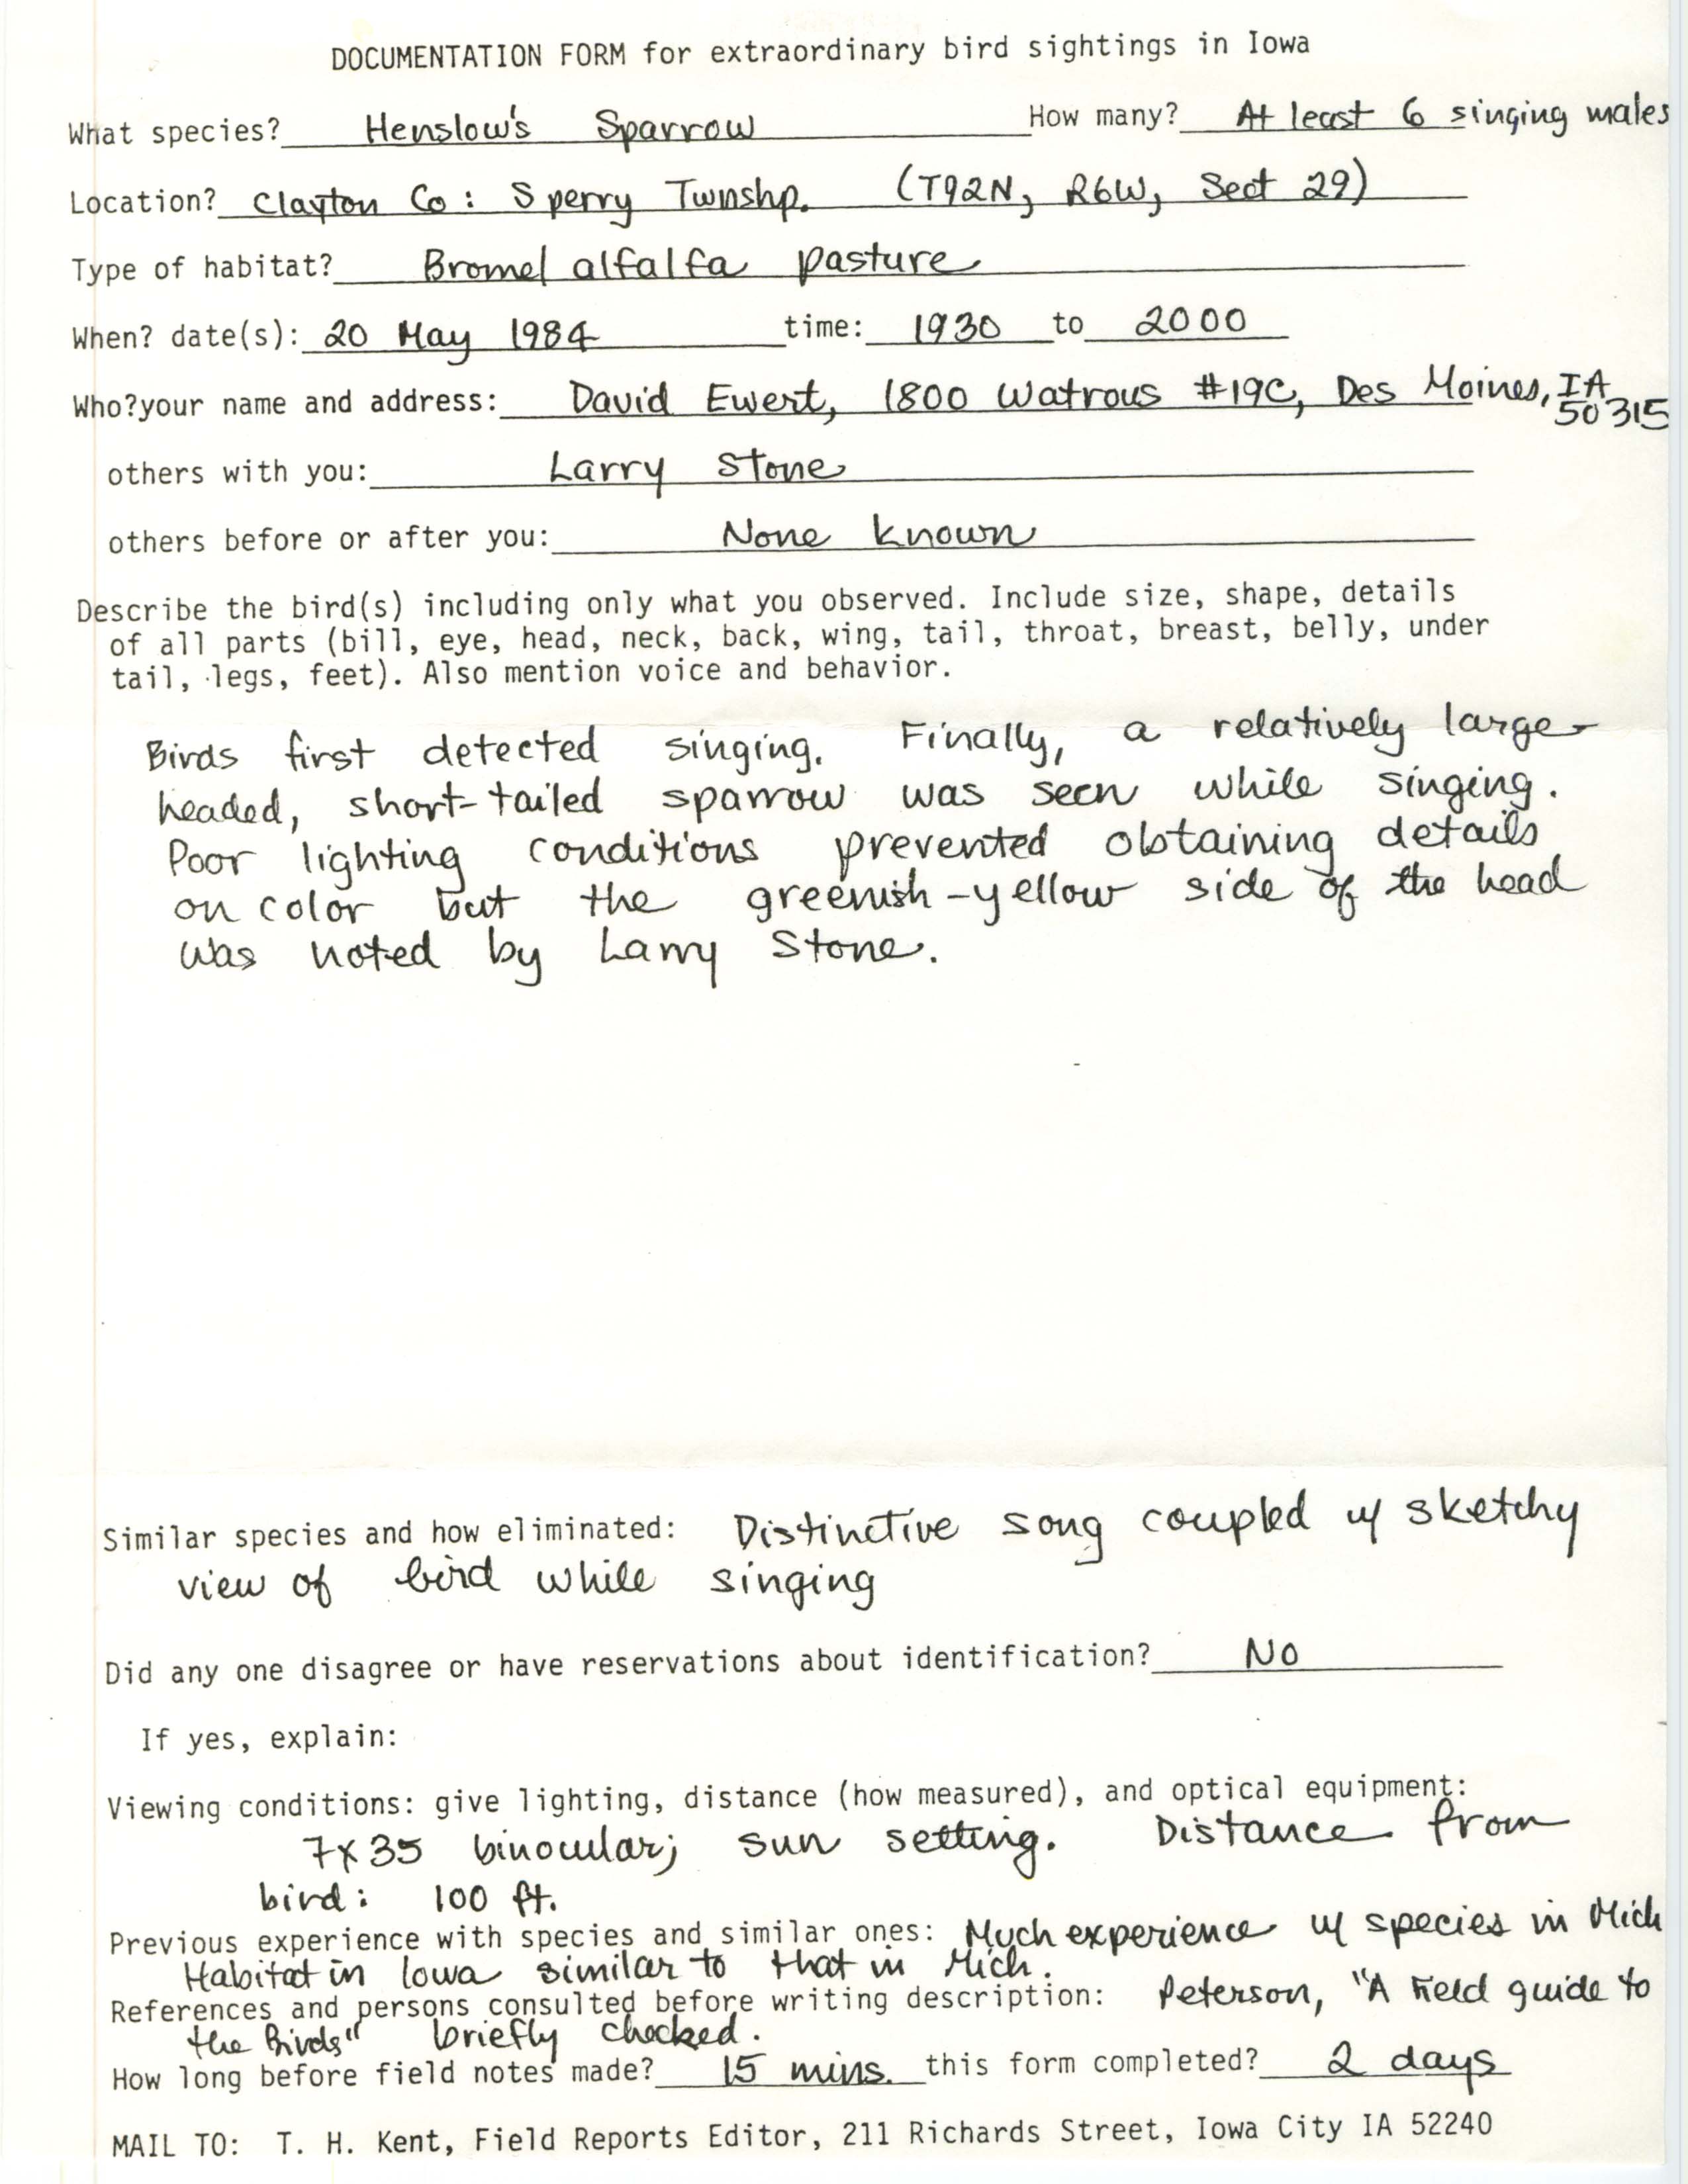 Rare bird documentation form for Henslow's Sparrow at Sperry Township in Clayton County, 1984